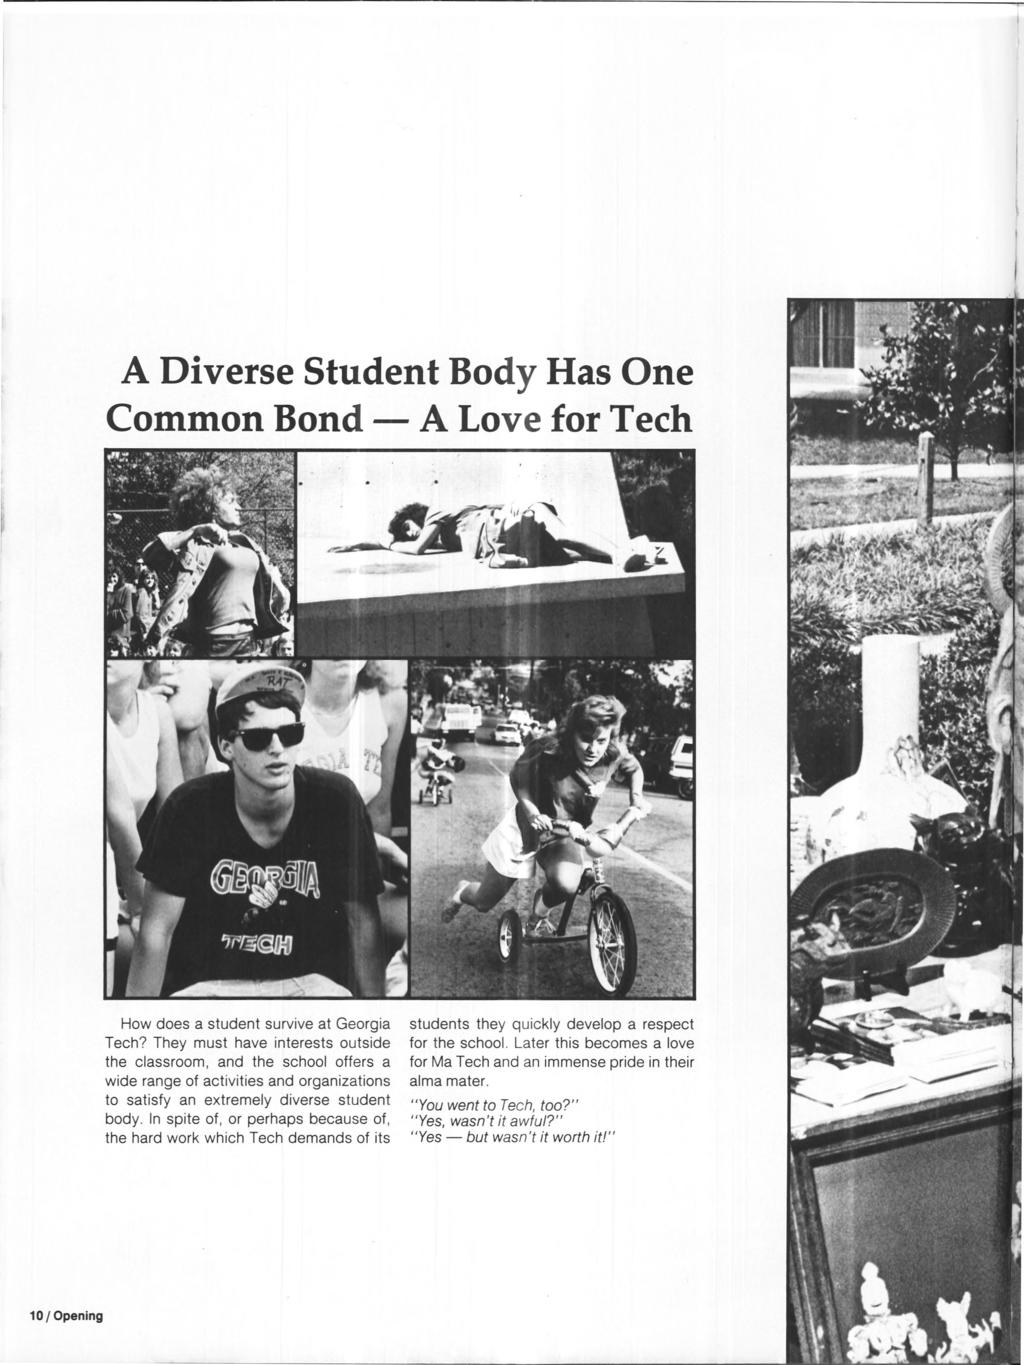 A Diverse Student Body Has One Common Bond A Love for Tech How does a student survive at Georgia Tech?